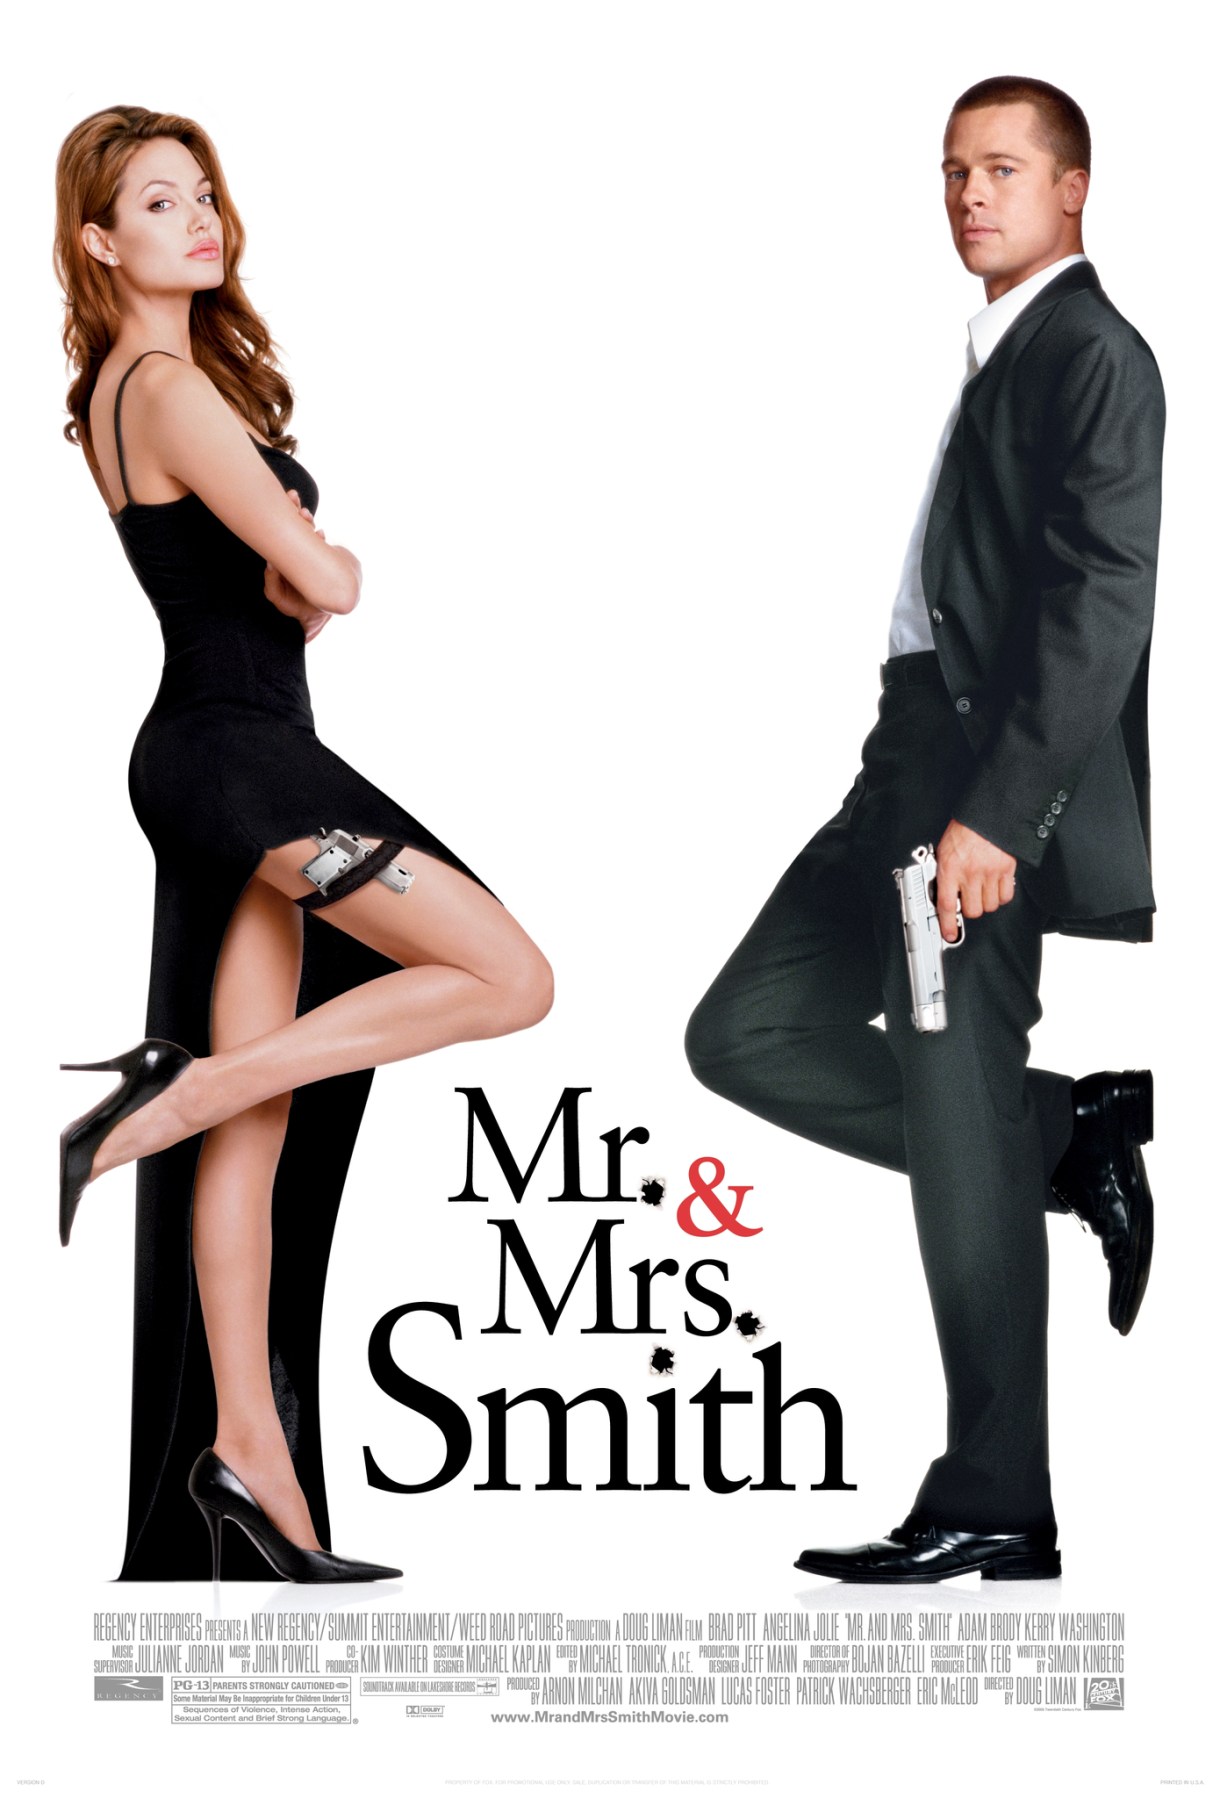 the cover of mr. and mrs. smith shows angelina jolie and brad pitt both leaning sexily, jolie in a black dress, pitt in a suit, each of them displaying a gun.